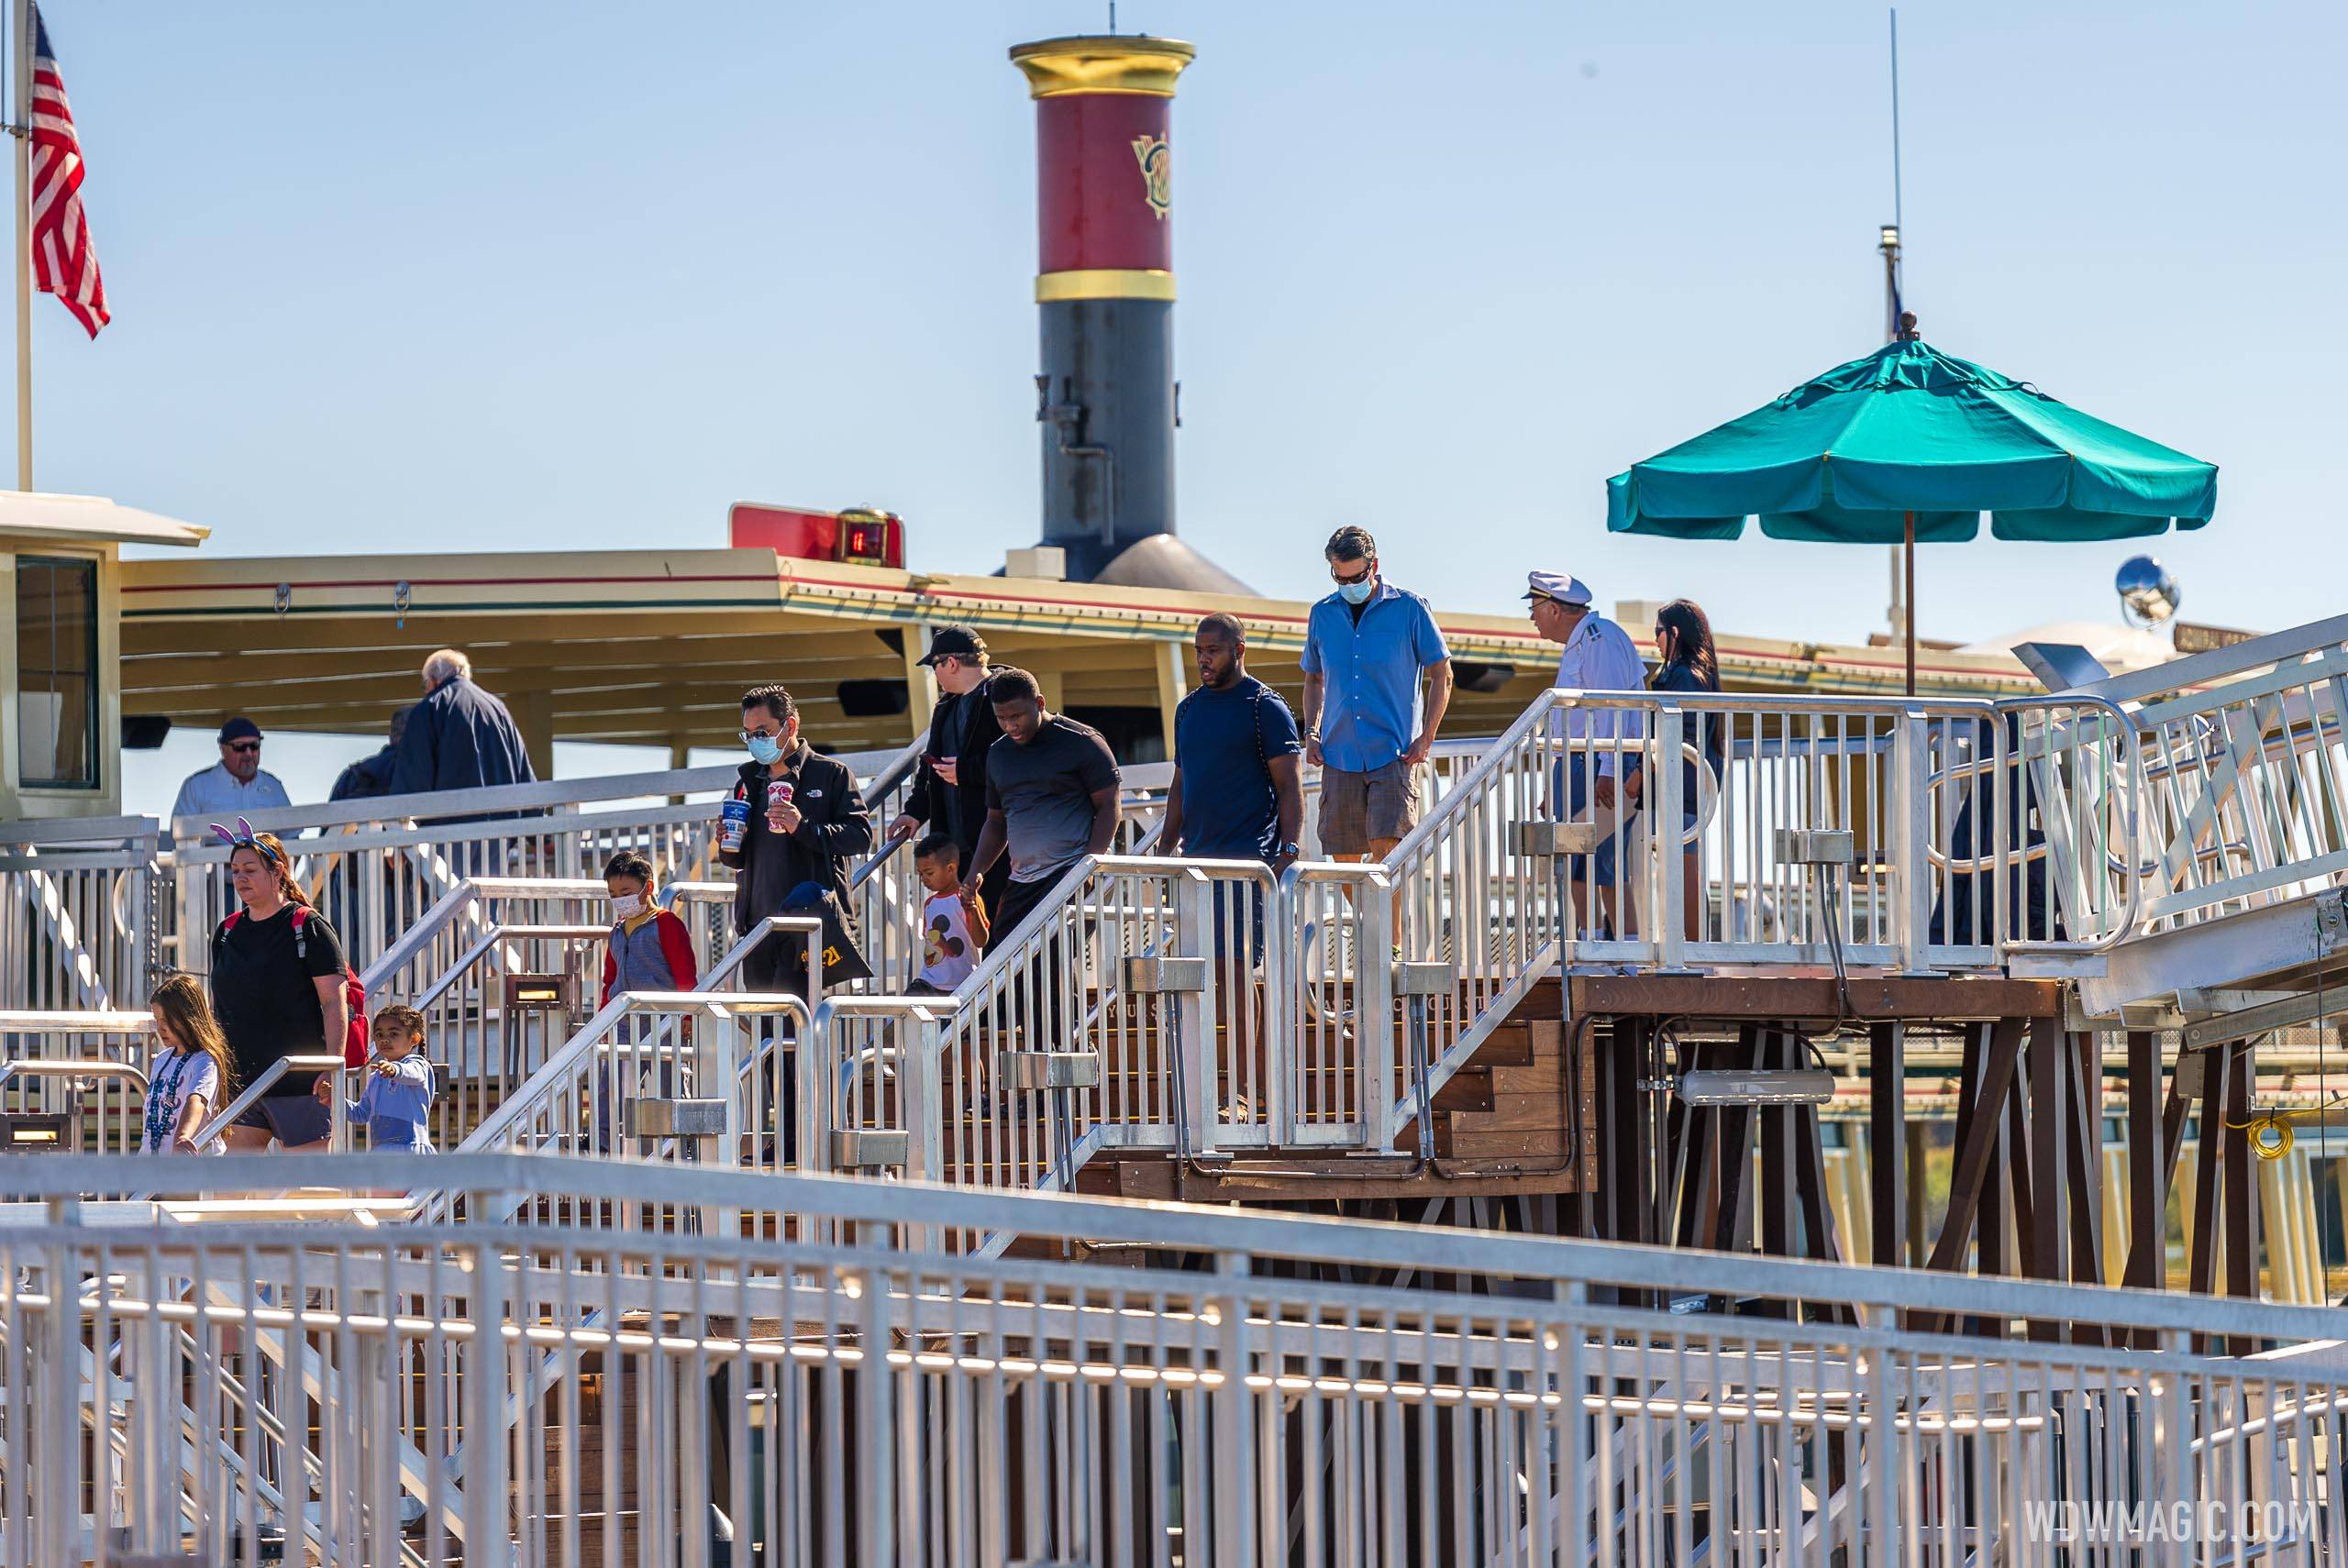 Second level access in use at Magic Kingdom Ferry Boat dock